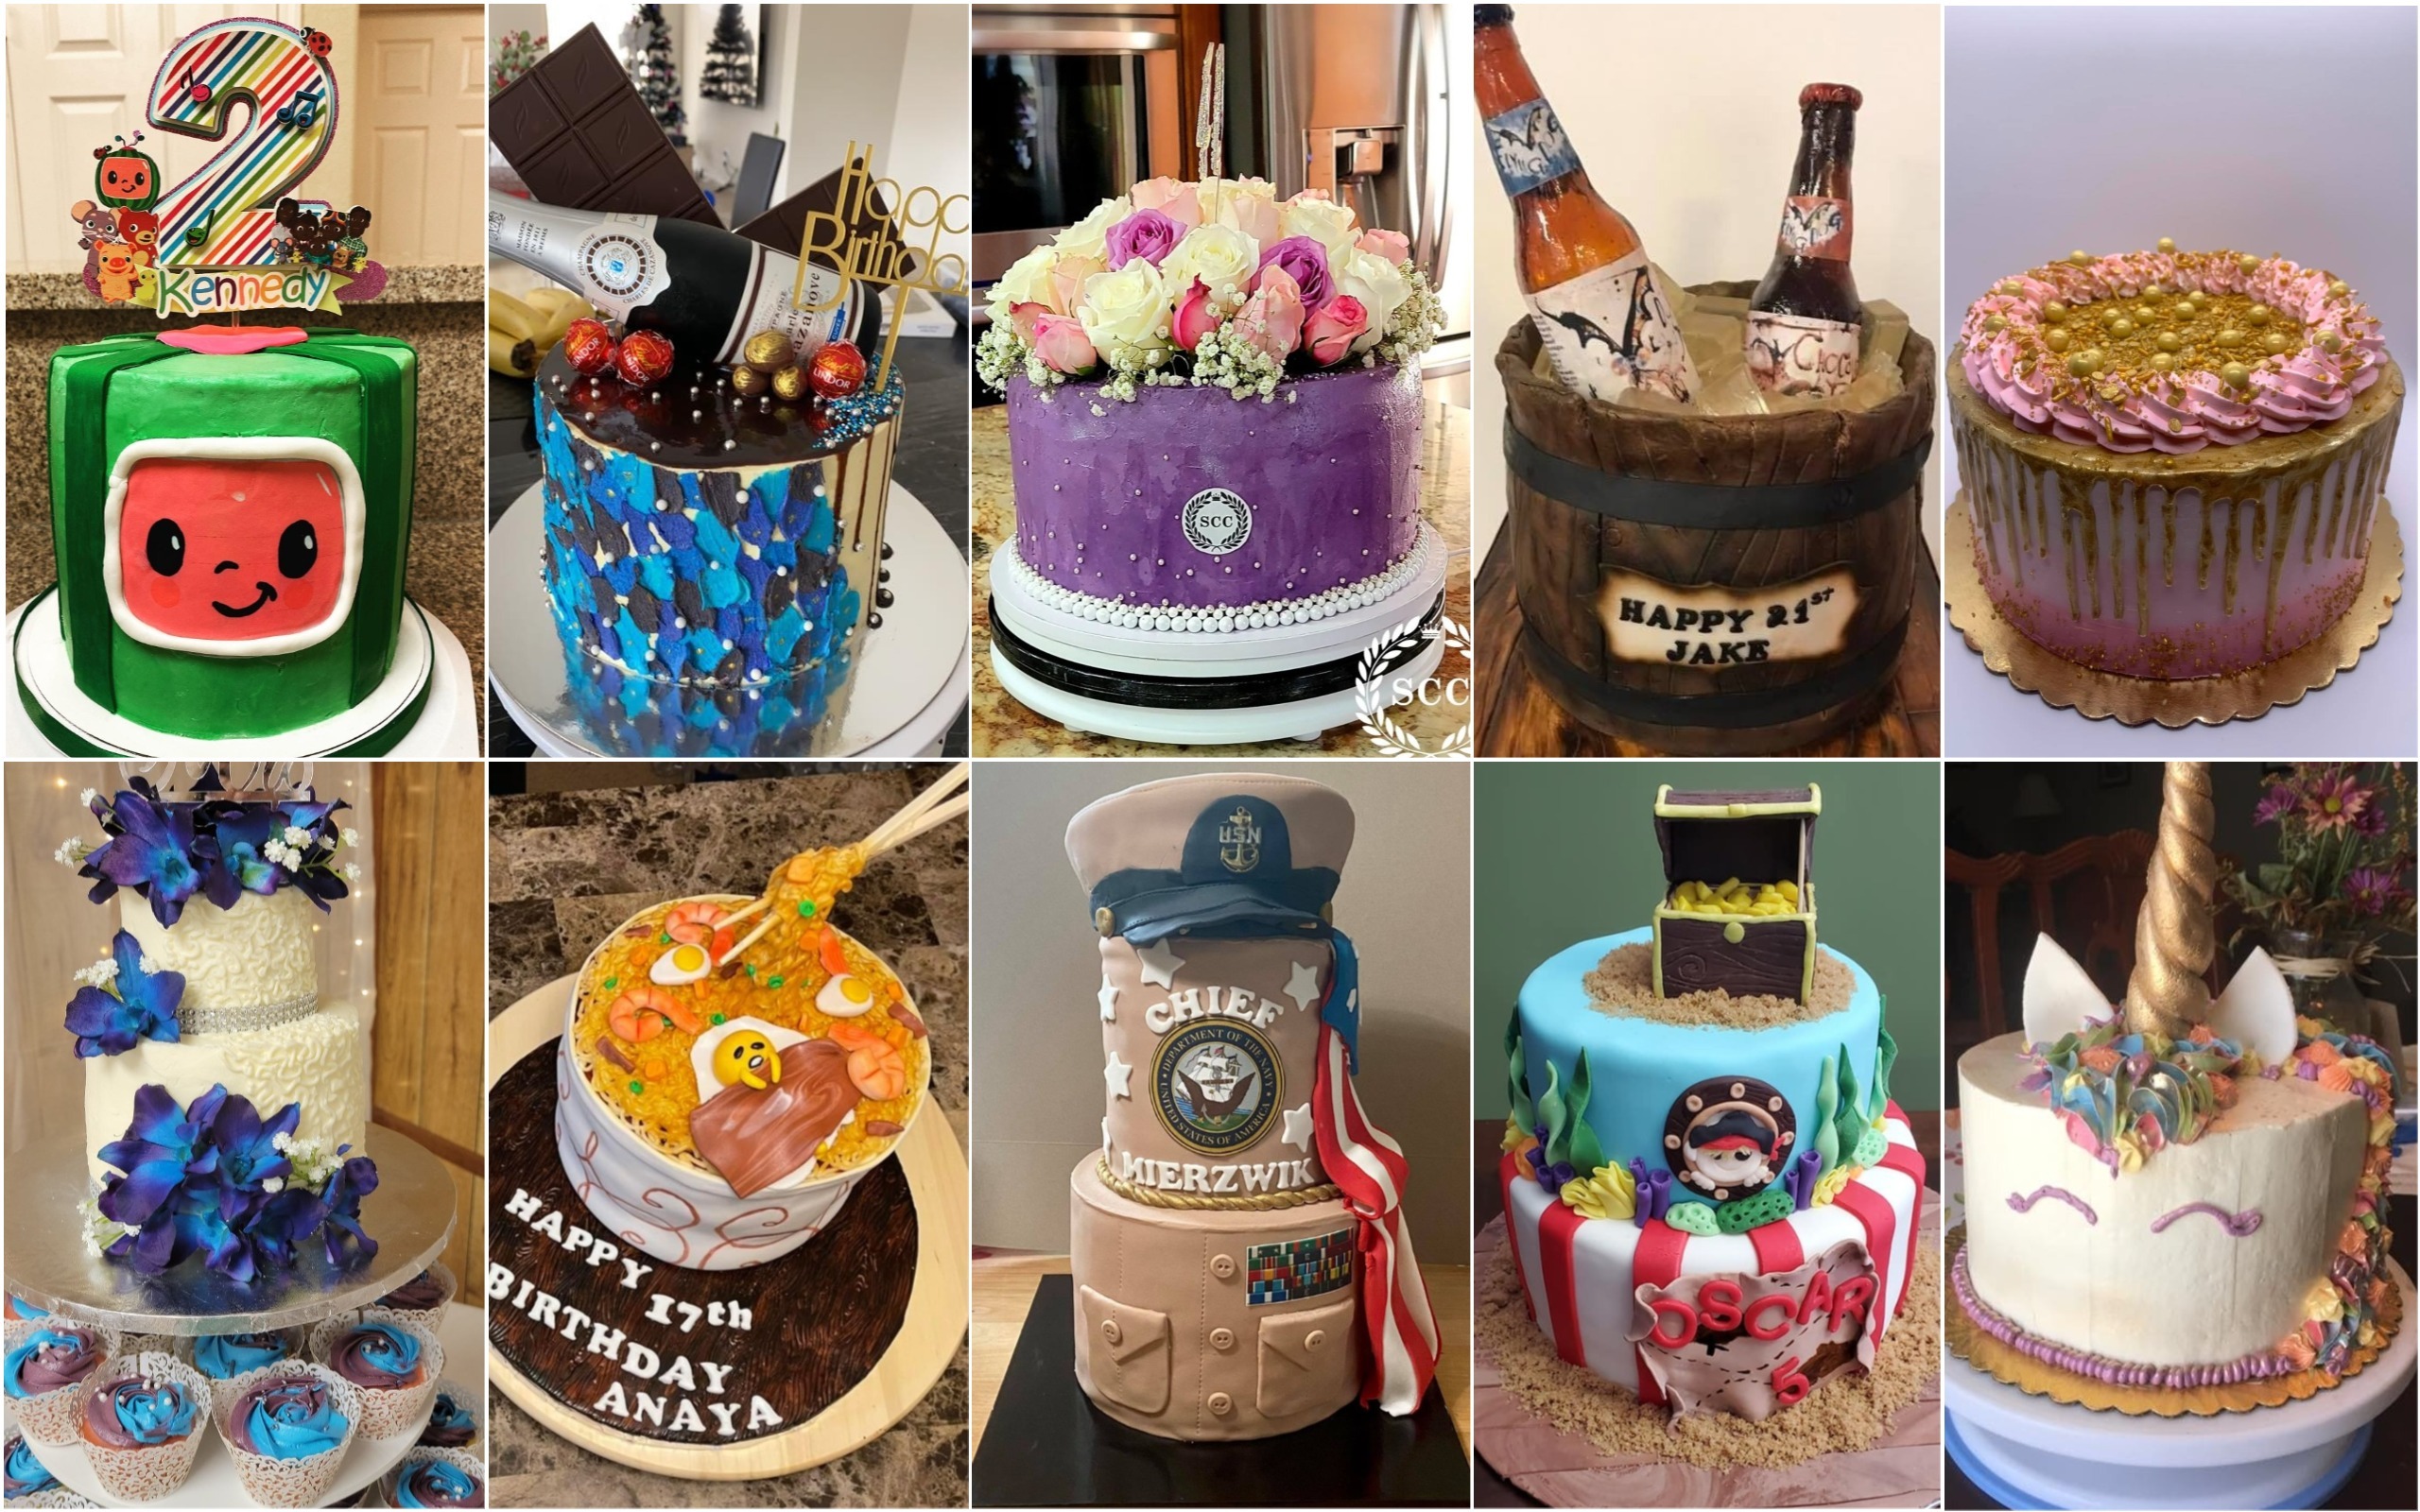 Our most creative cake ideas | BBC Good Food